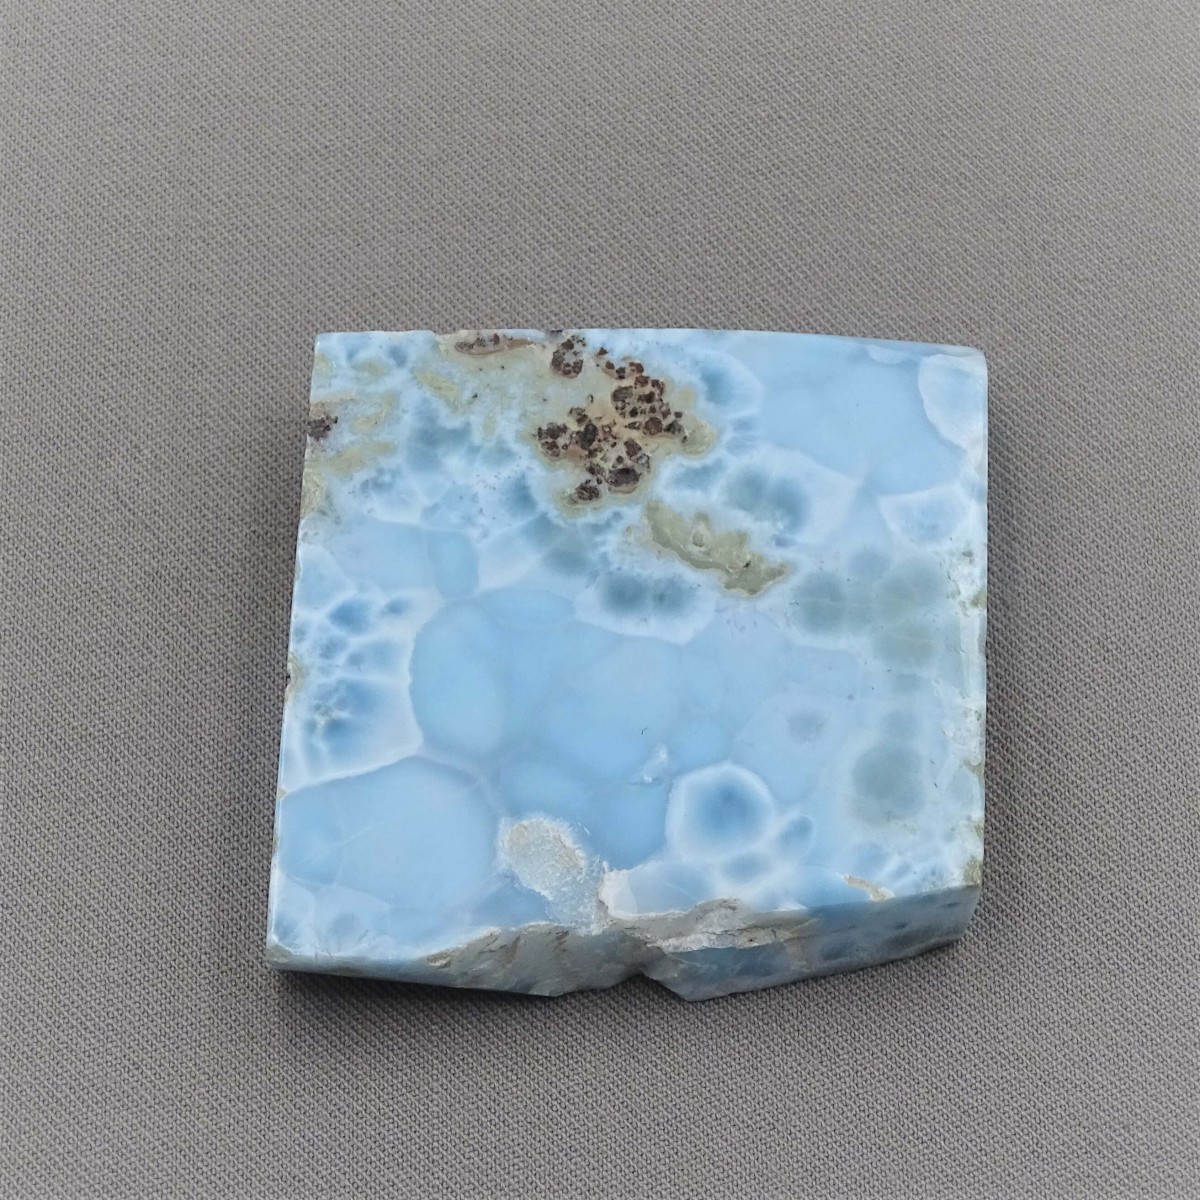 Larimar plate polished 56g, Dominican republic